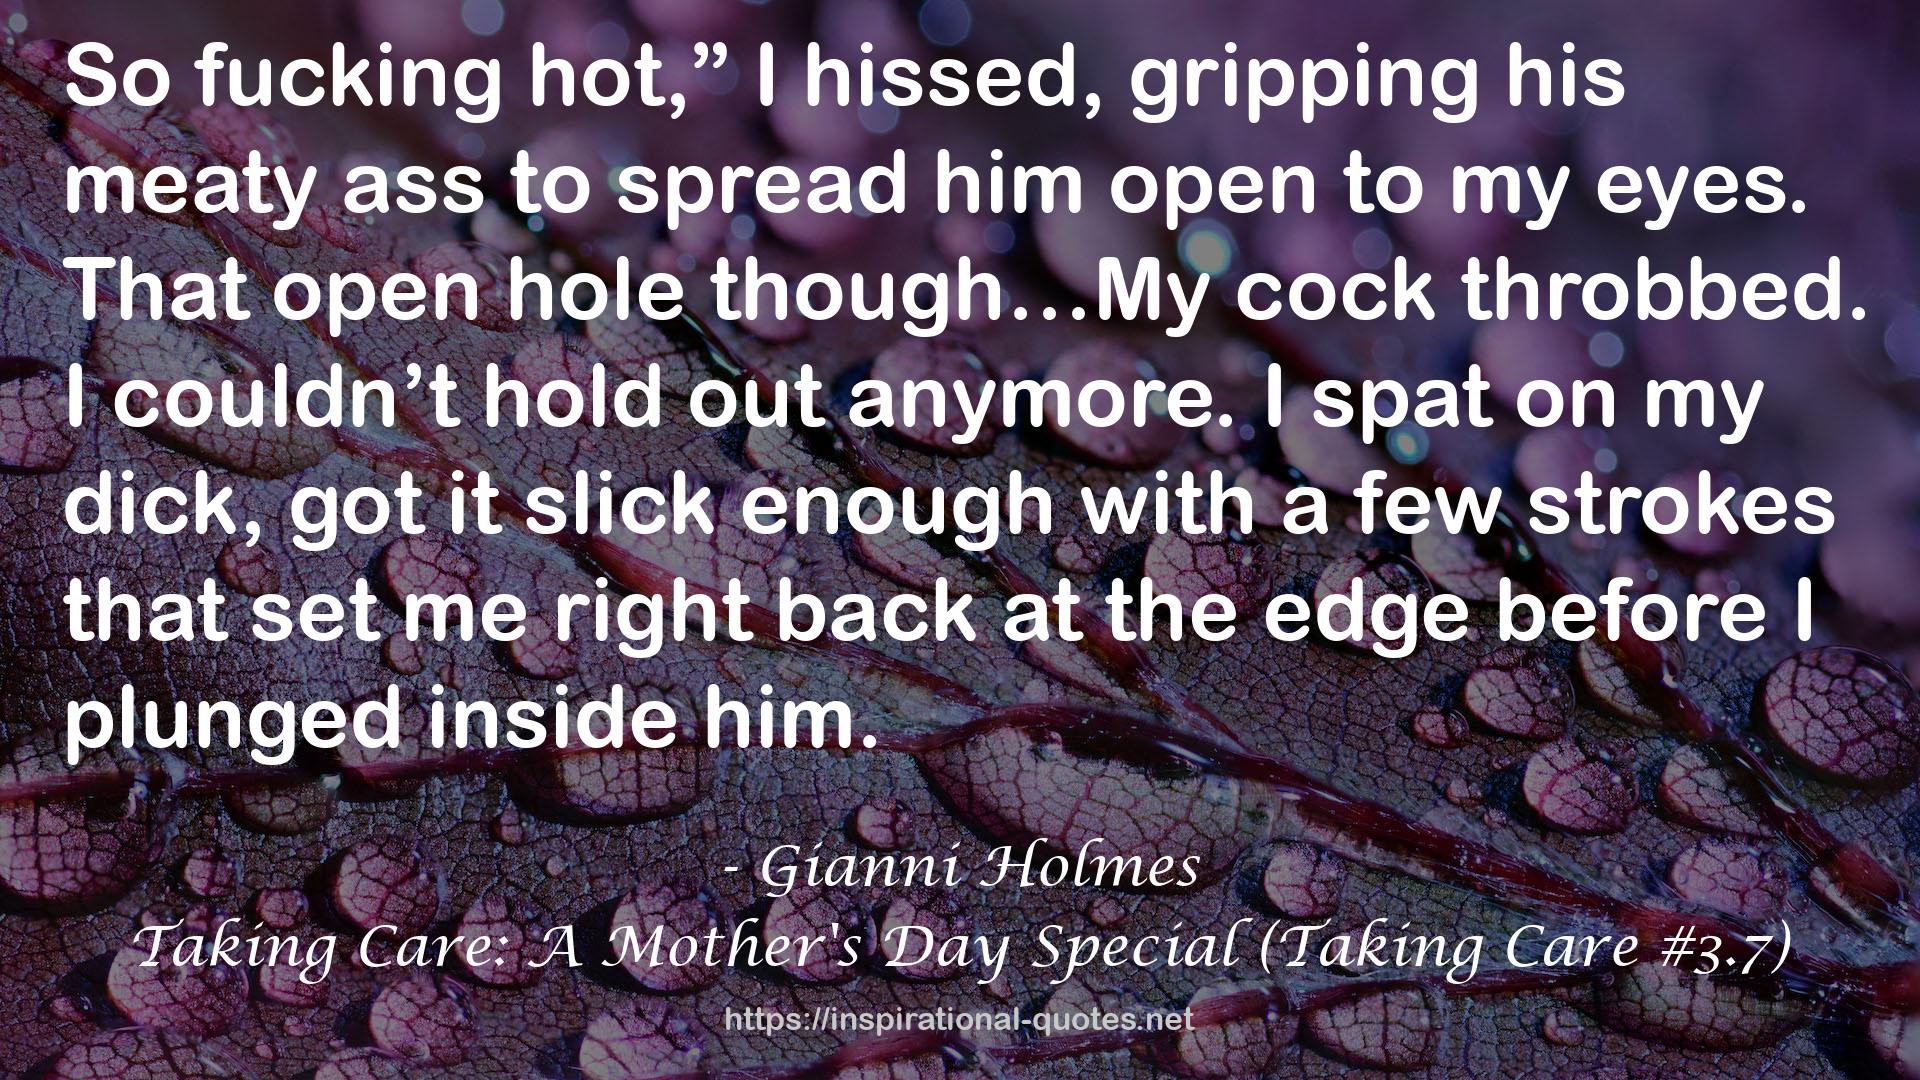 Taking Care: A Mother's Day Special (Taking Care #3.7) QUOTES